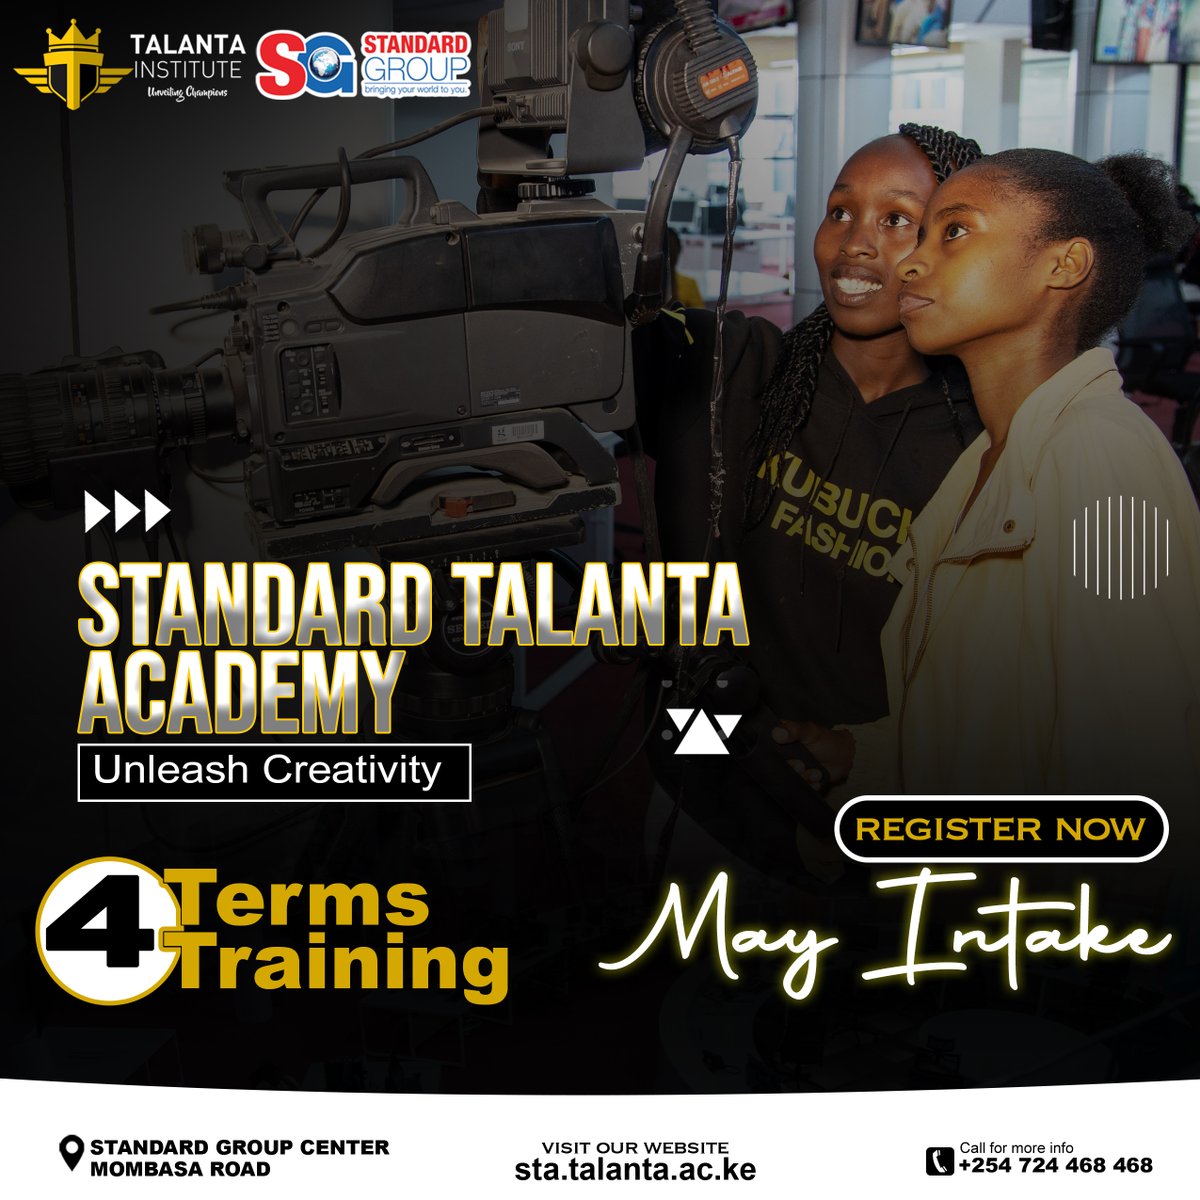 Dreaming of a career in the media industry? Standard Talanta Academy is your gateway to mastering these skills and more. Join us and turn passion into profession! To learn more visit sta.talanta.ac.ke or call +254 724 468 468